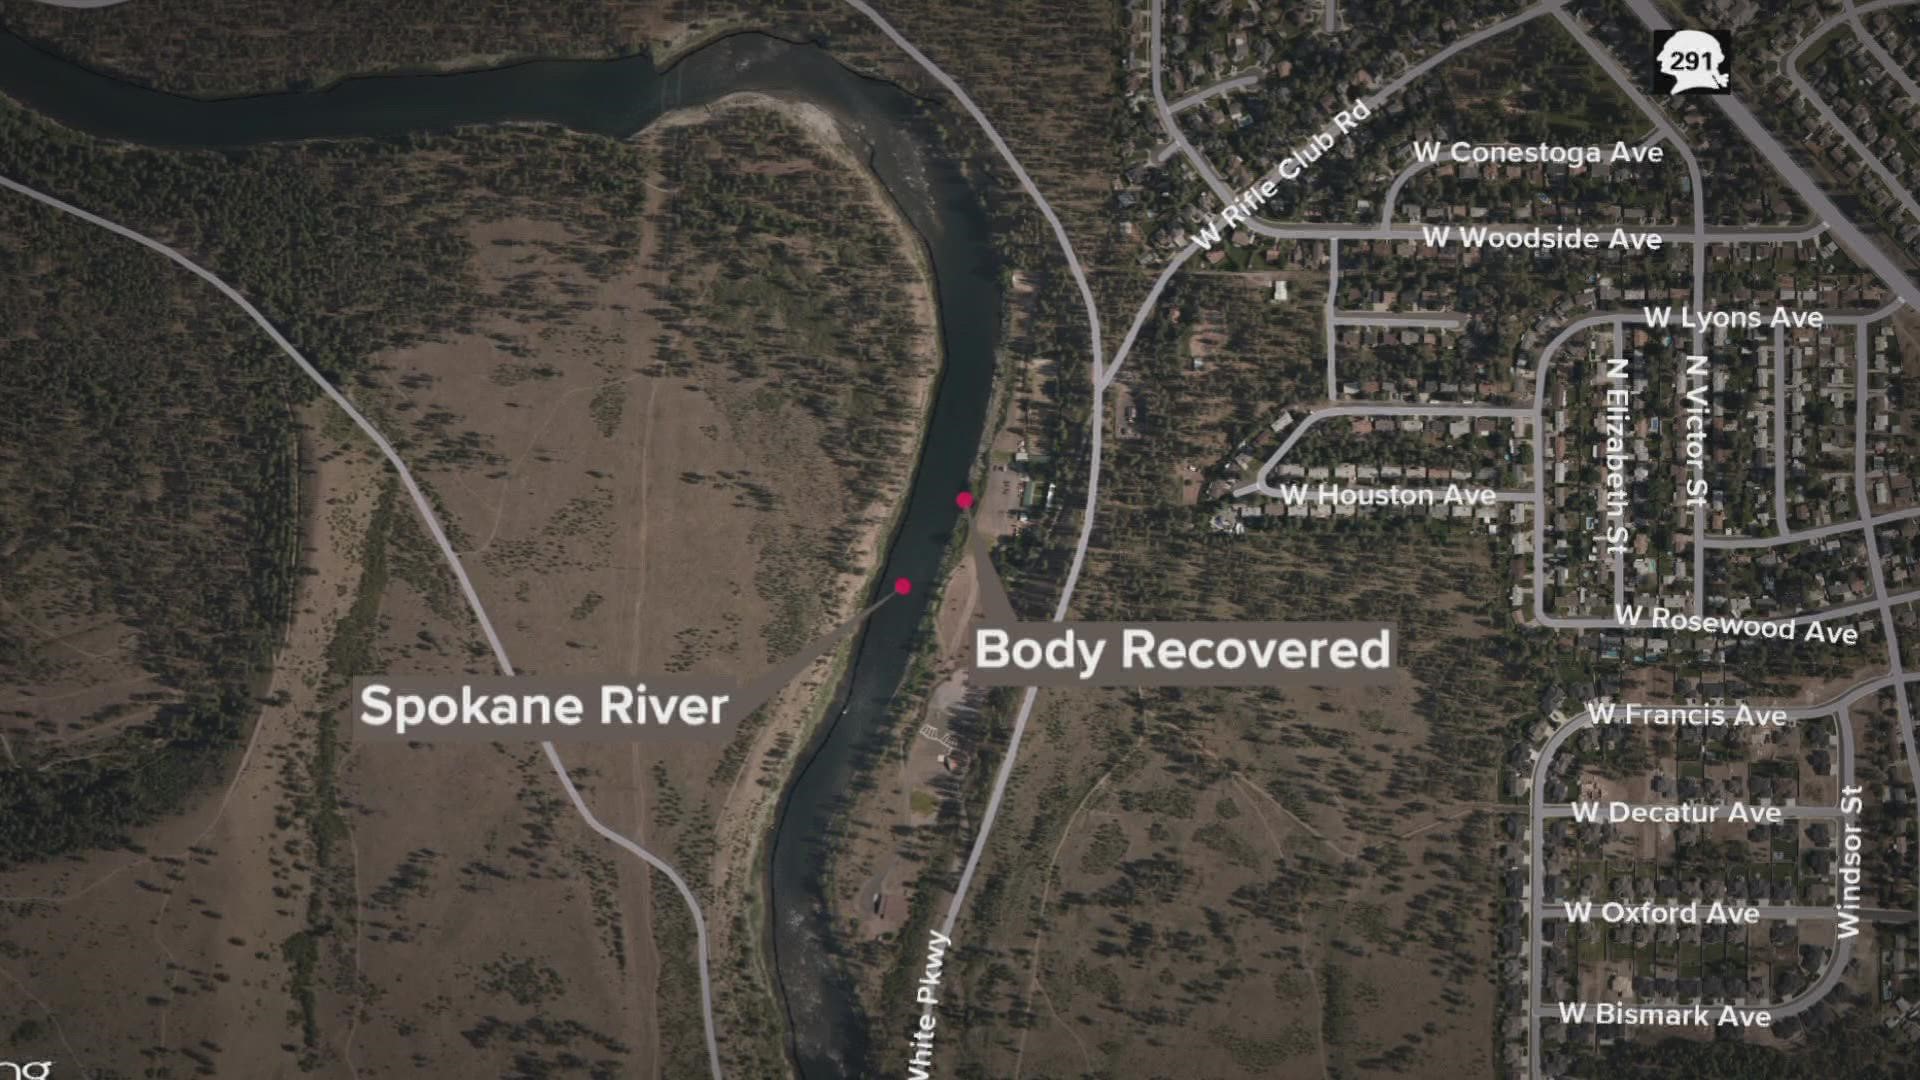 The person was recovered from the river on Friday afternoon after a paddle boarder reported the body to police on Thursday afternoon.